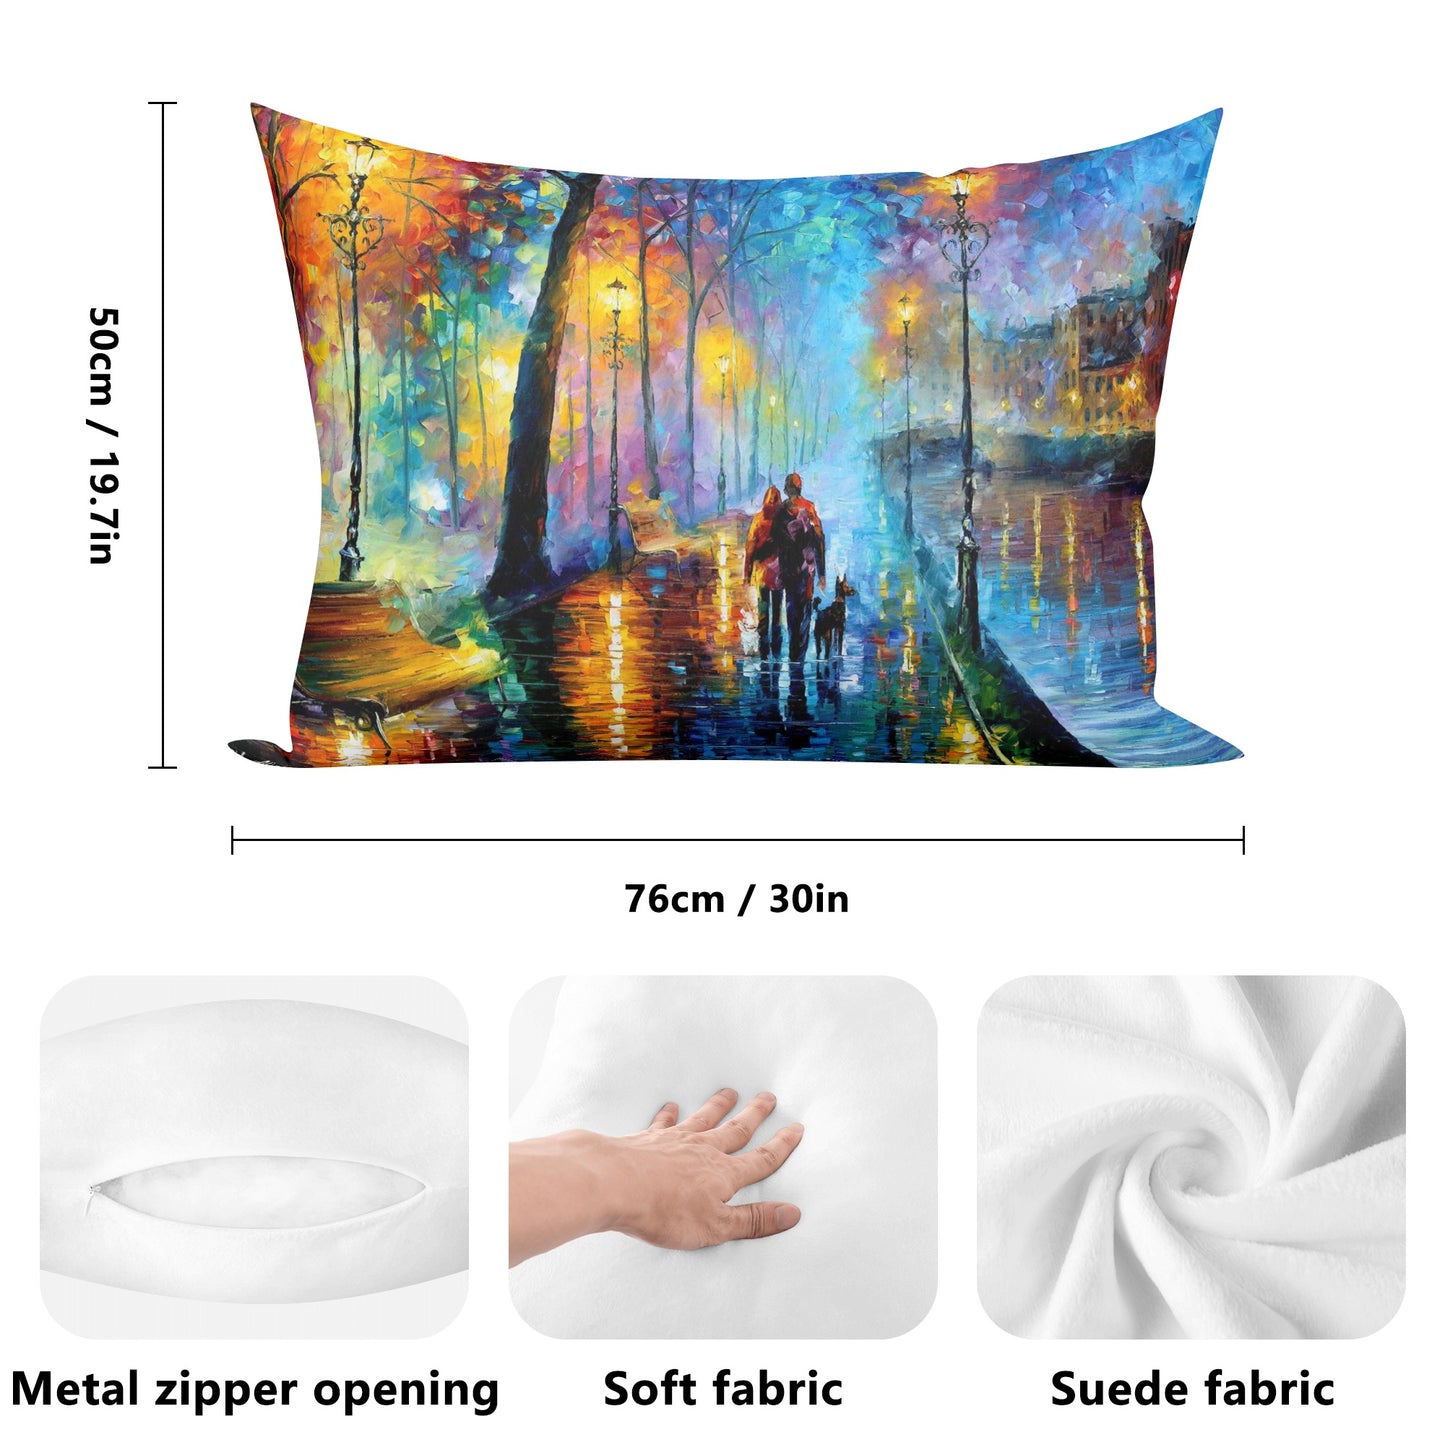 Double Side Printing Rectangular Pillow Cover Afremov MELODY OF THE NIGHT